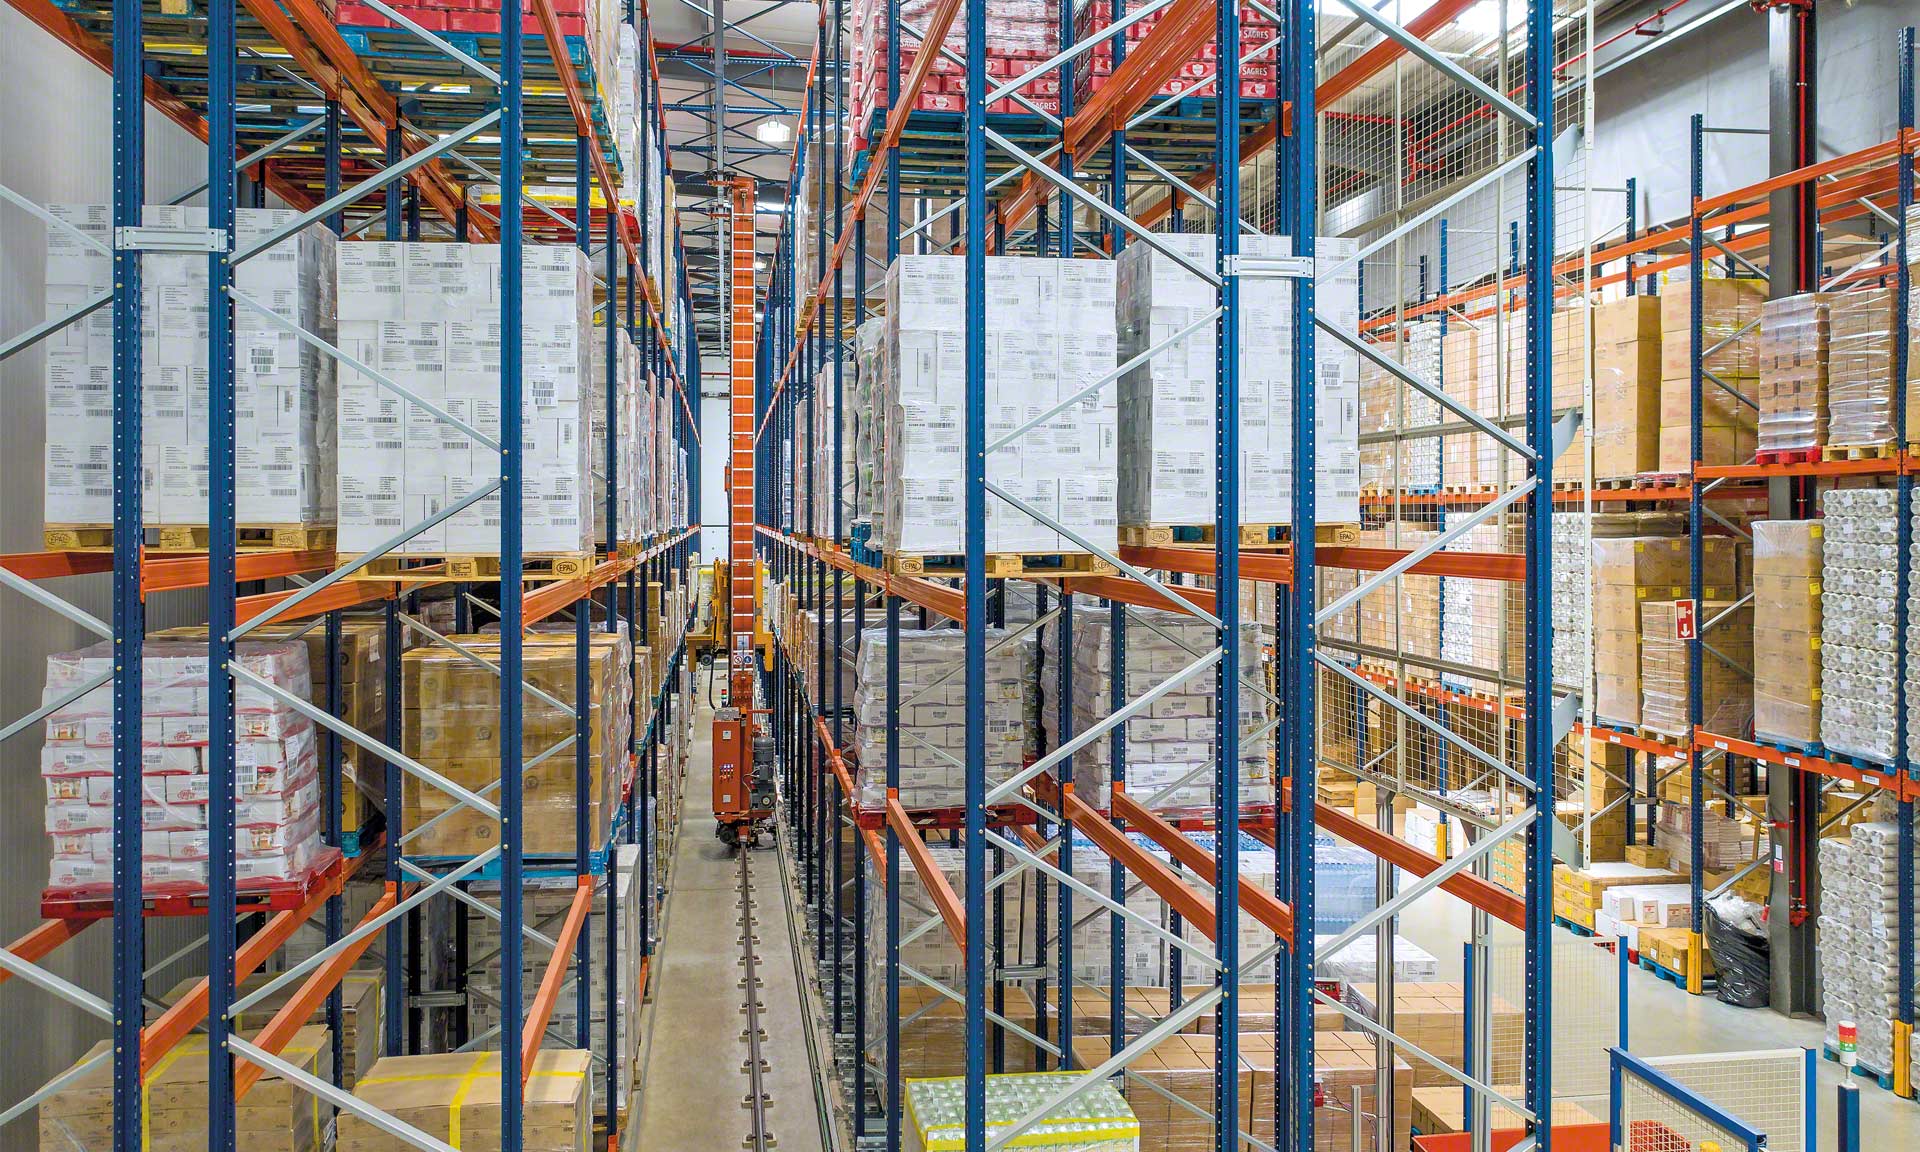 The Havi Logistics automated warehouse combines innovation and efficiency thanks to Easy WMS